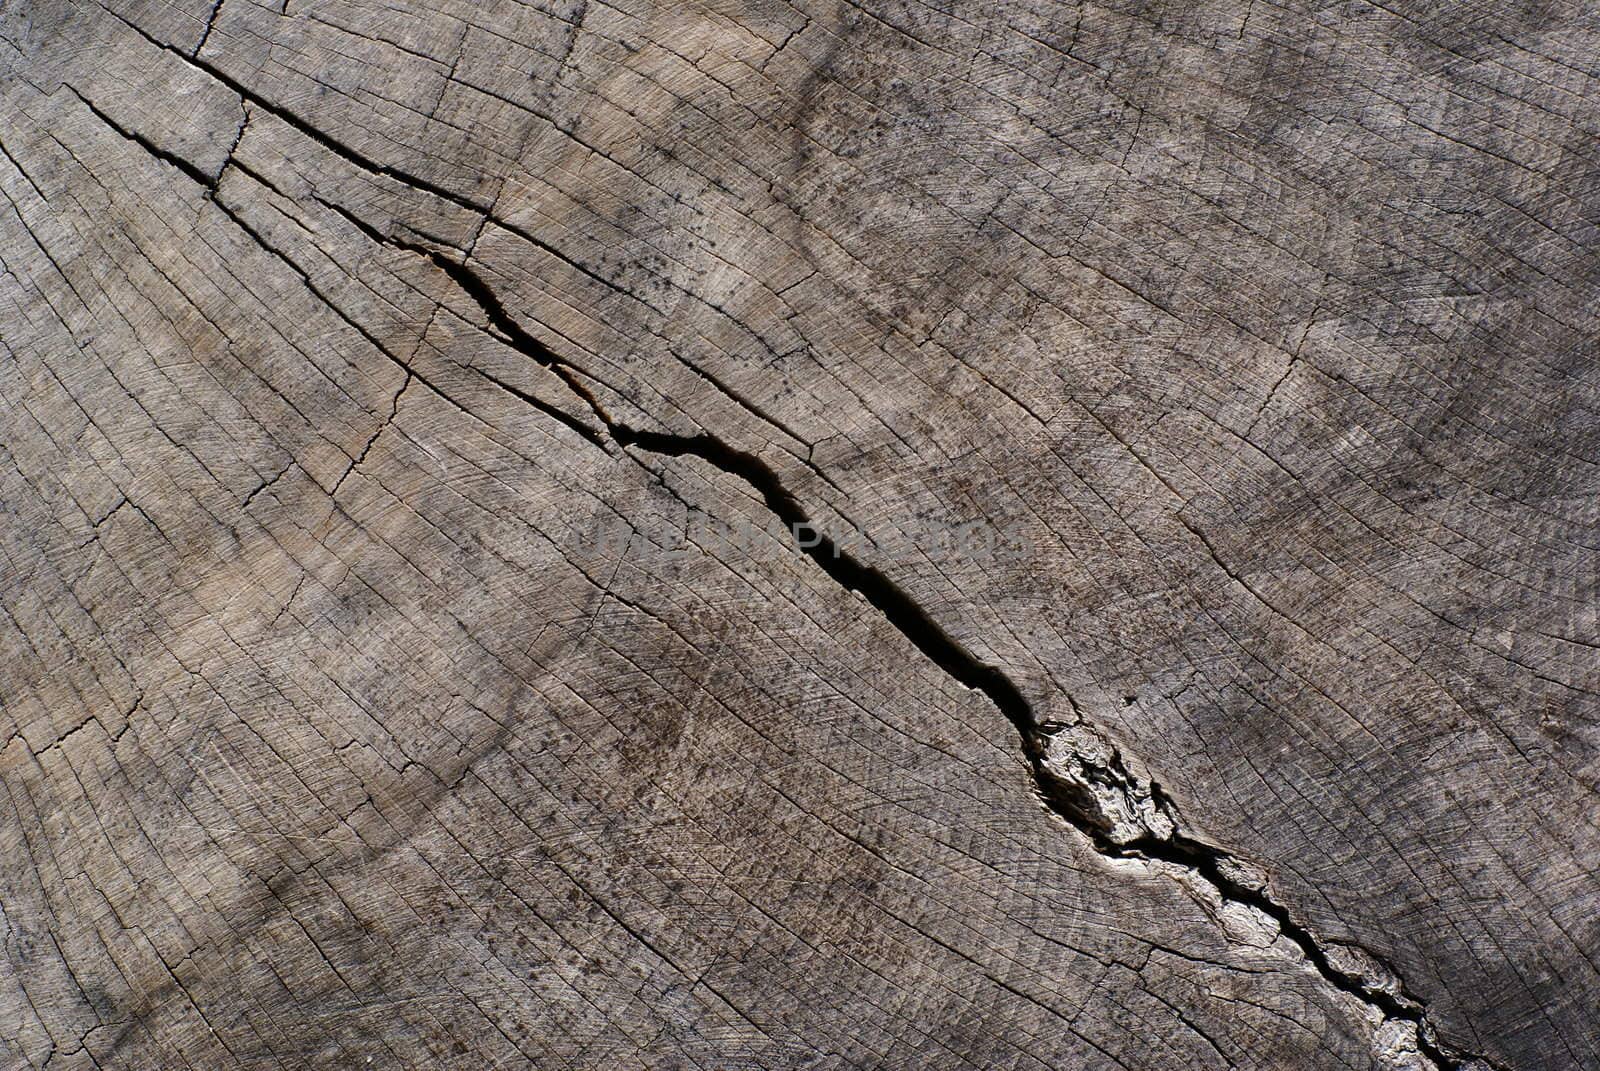 Trunk cross-section.